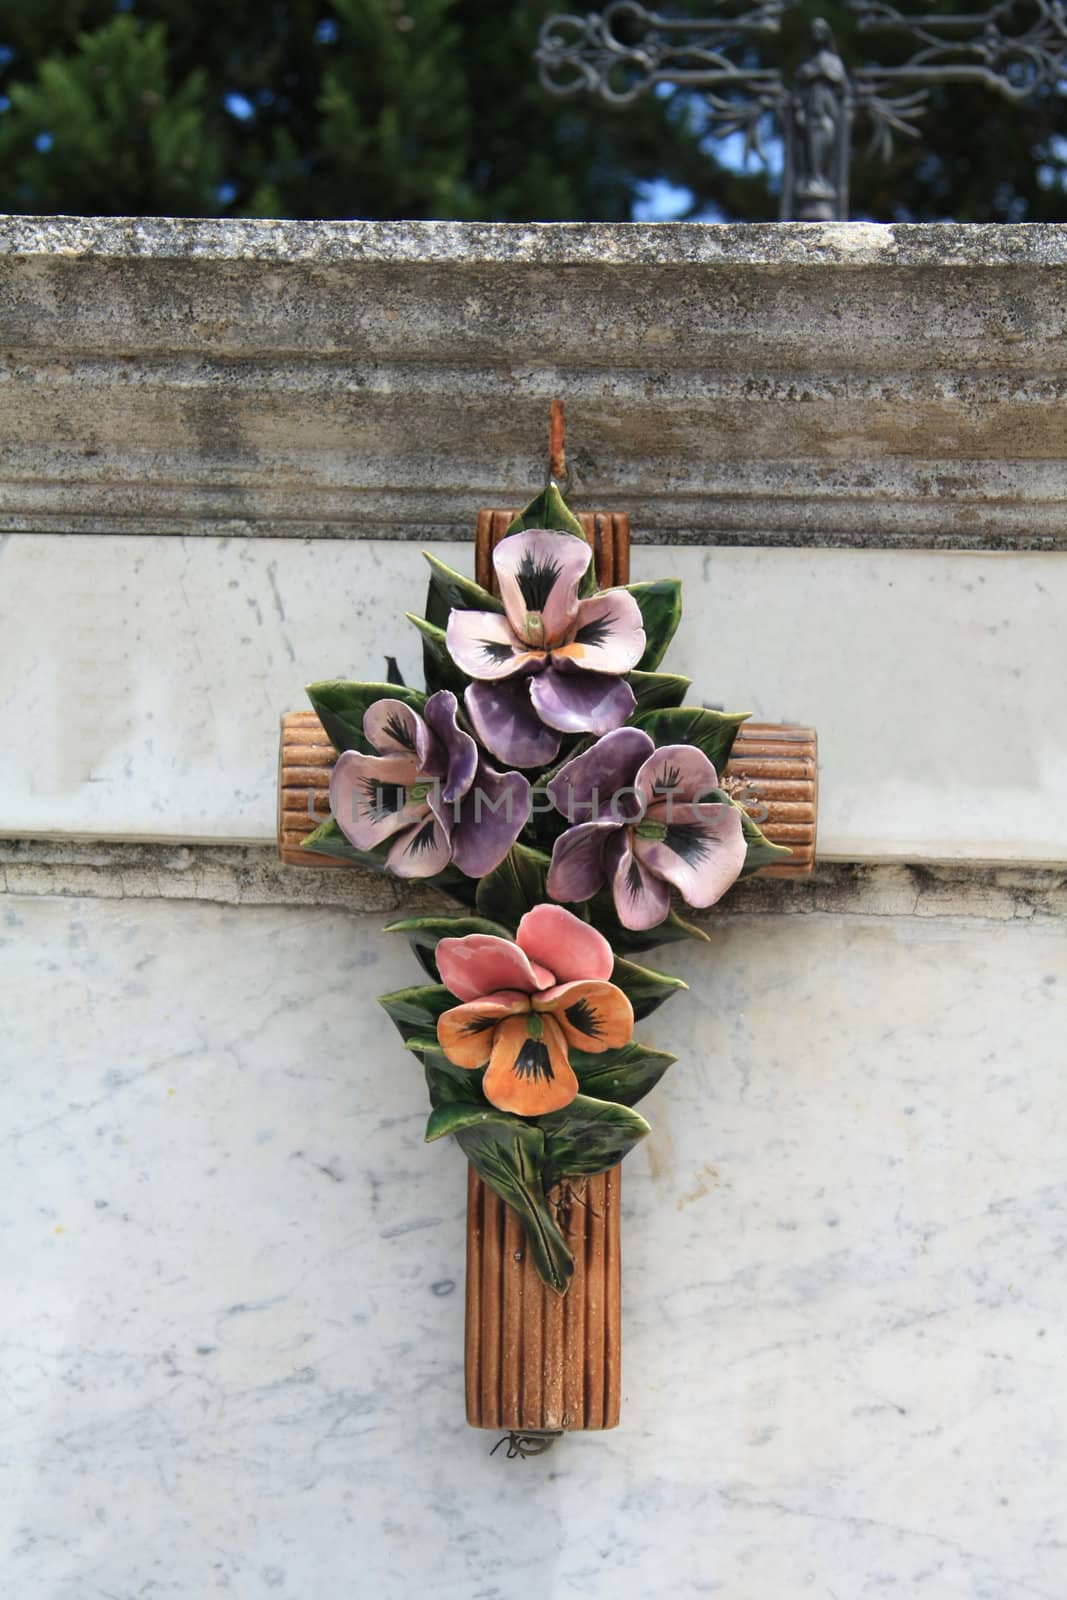 Ceramic flowers on a grave ornament in the Provence, France